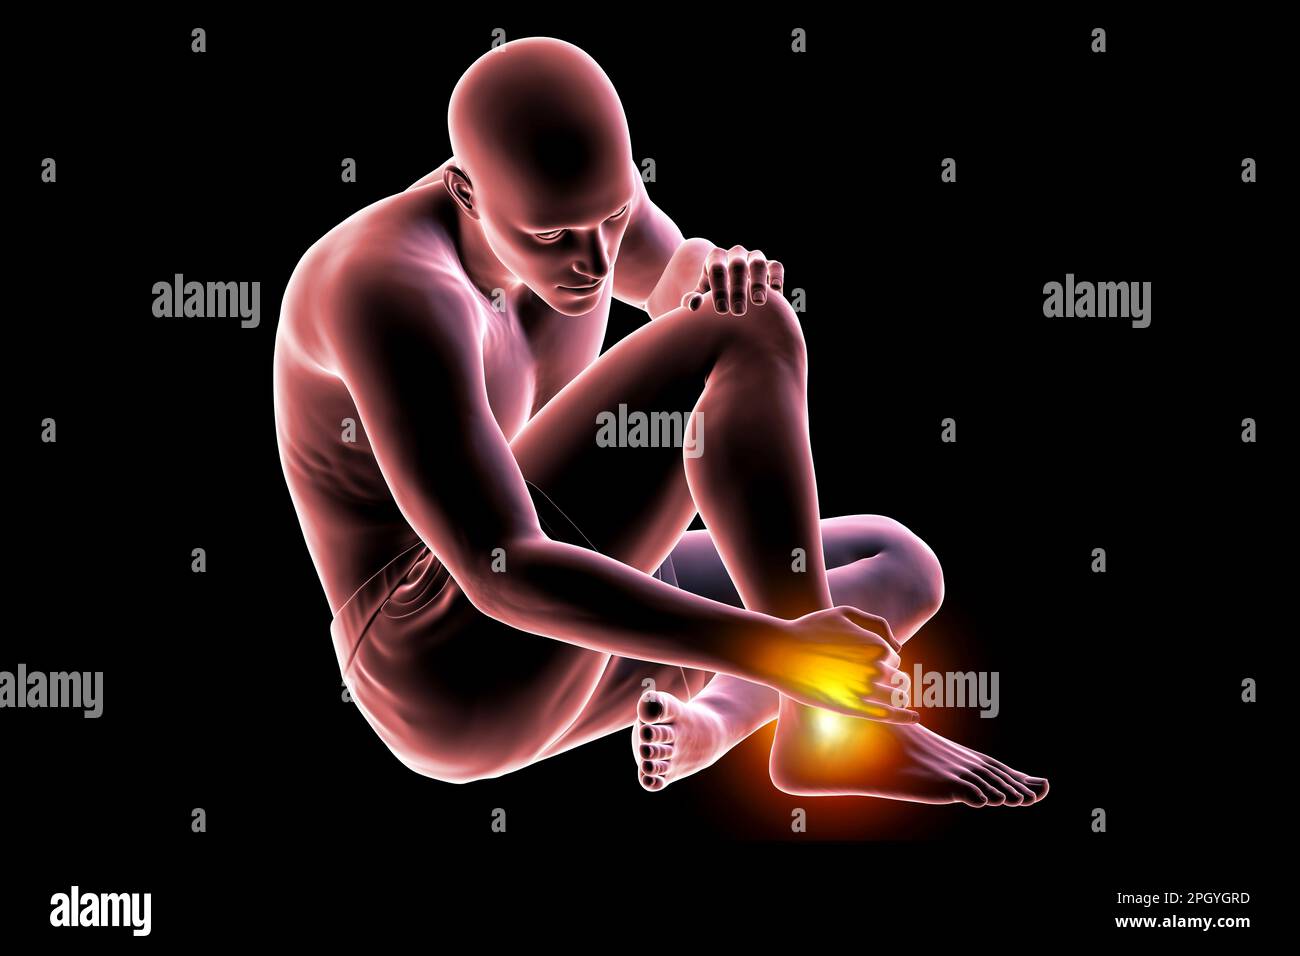 Man with ankle pain, illustration Stock Photo